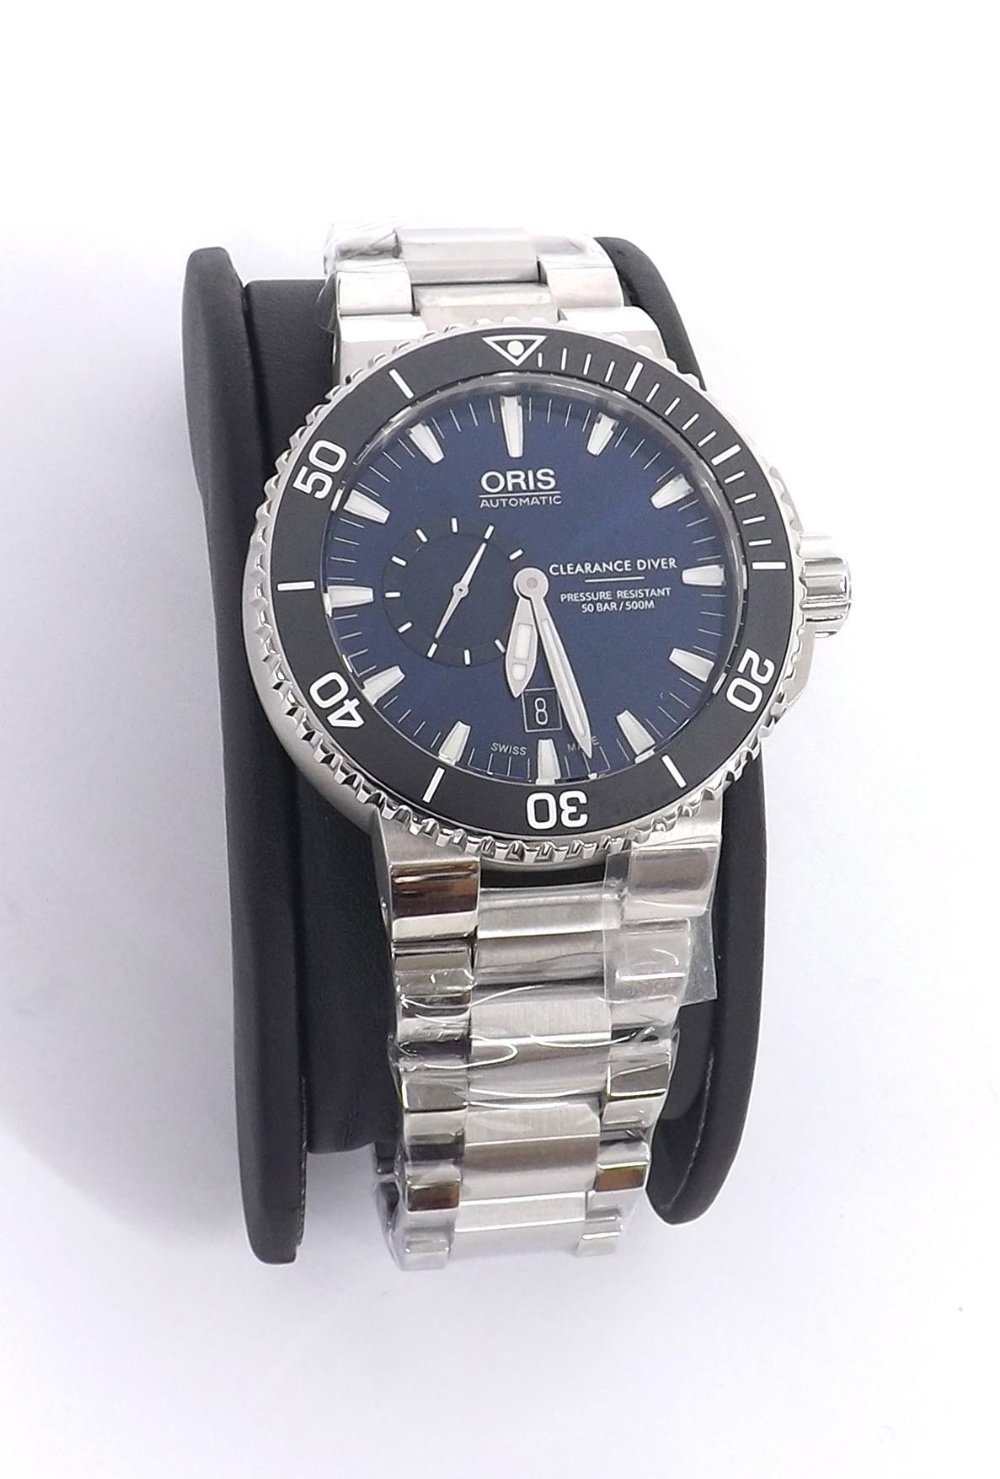 Oris Royal Navy Clearance Diver automatic stainless steel gentleman's bracelet watch, ref. 7673, - Image 2 of 3